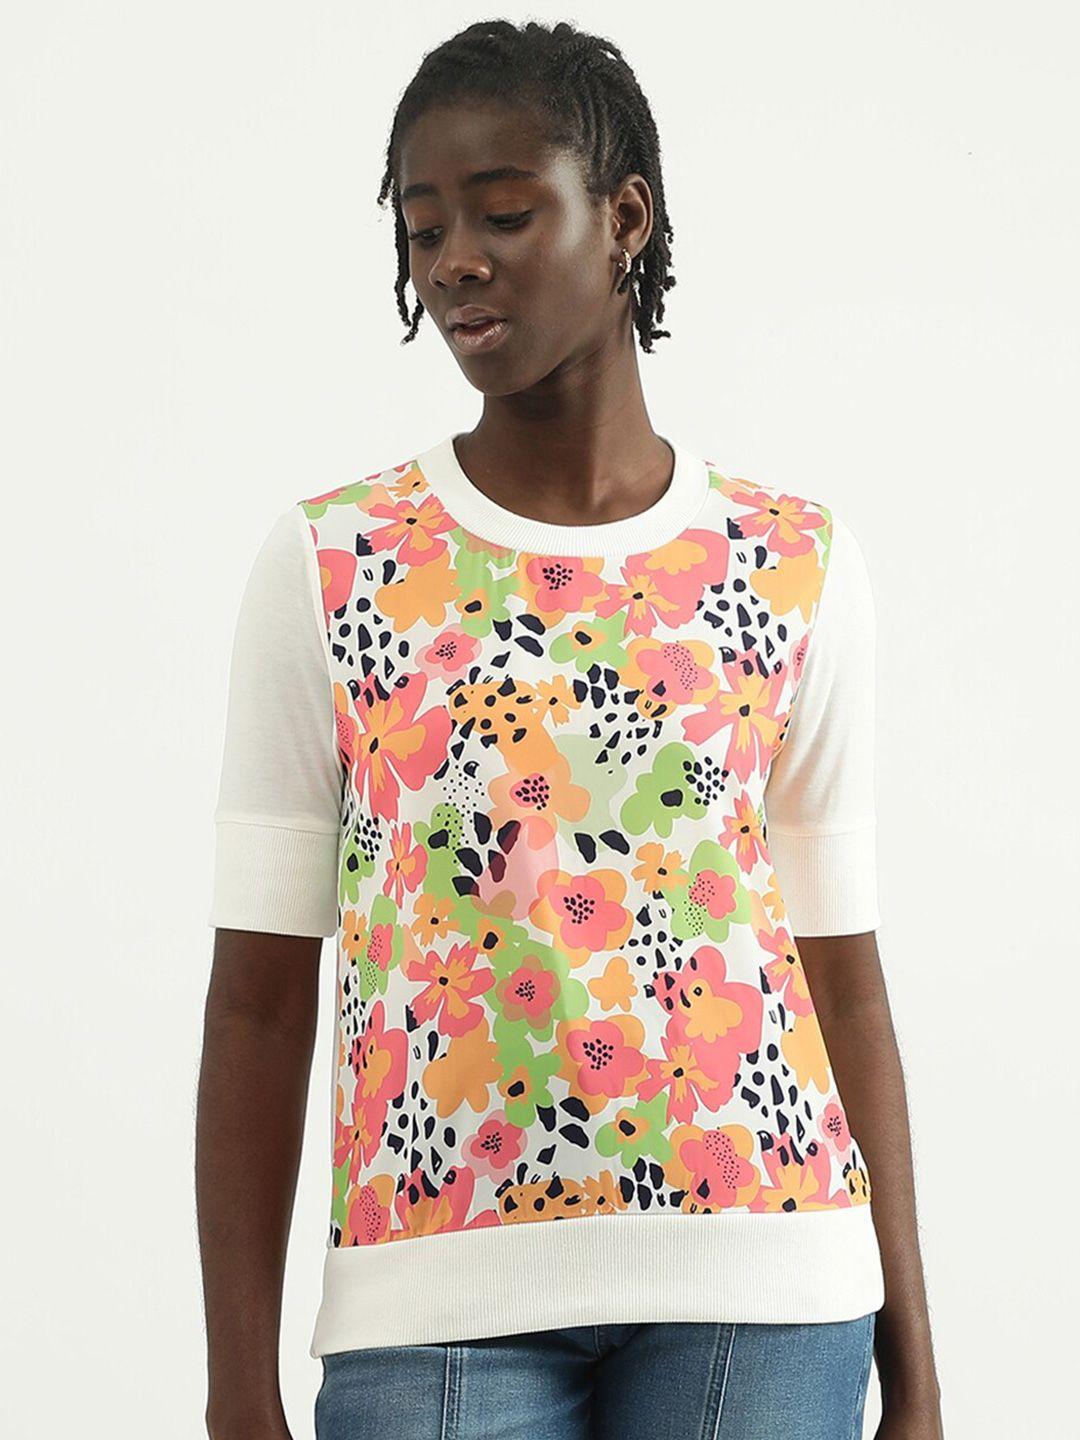 united-colors-of-benetton-floral-print-top